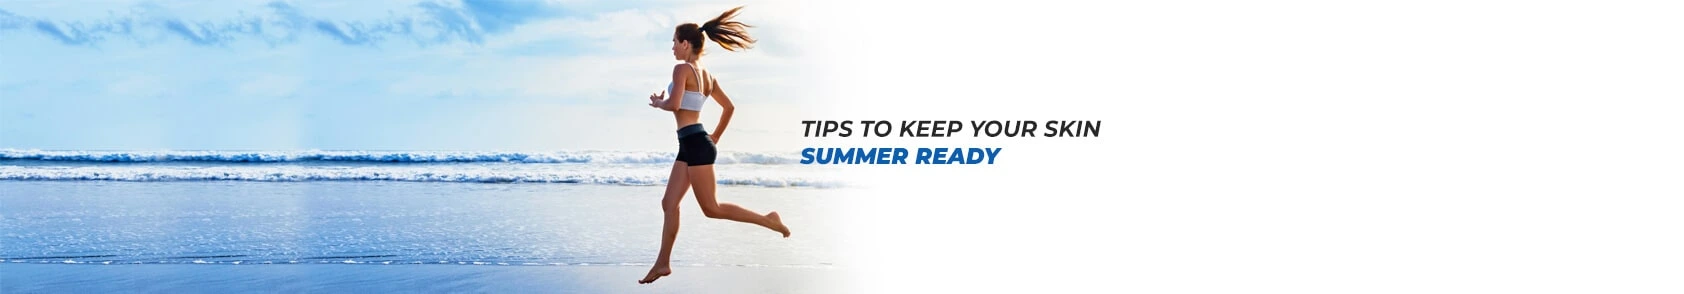 6 Tips to keep your skin summer ready